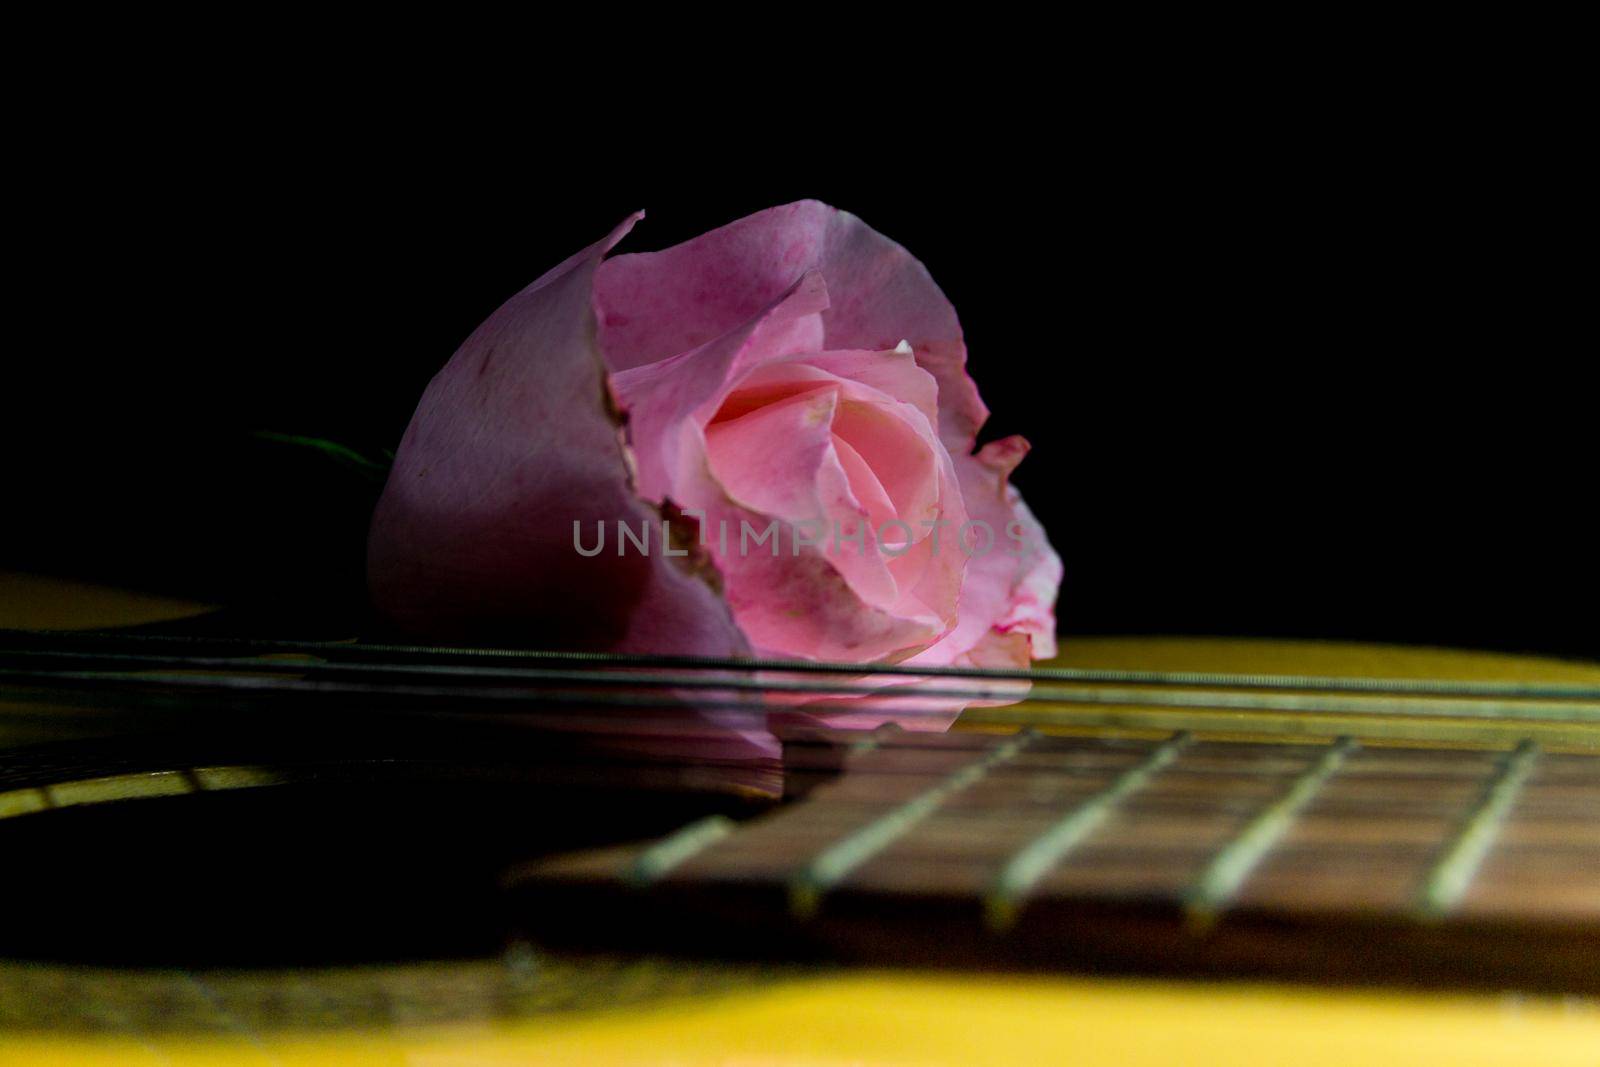 a pink bud on the guitar strings on a black background